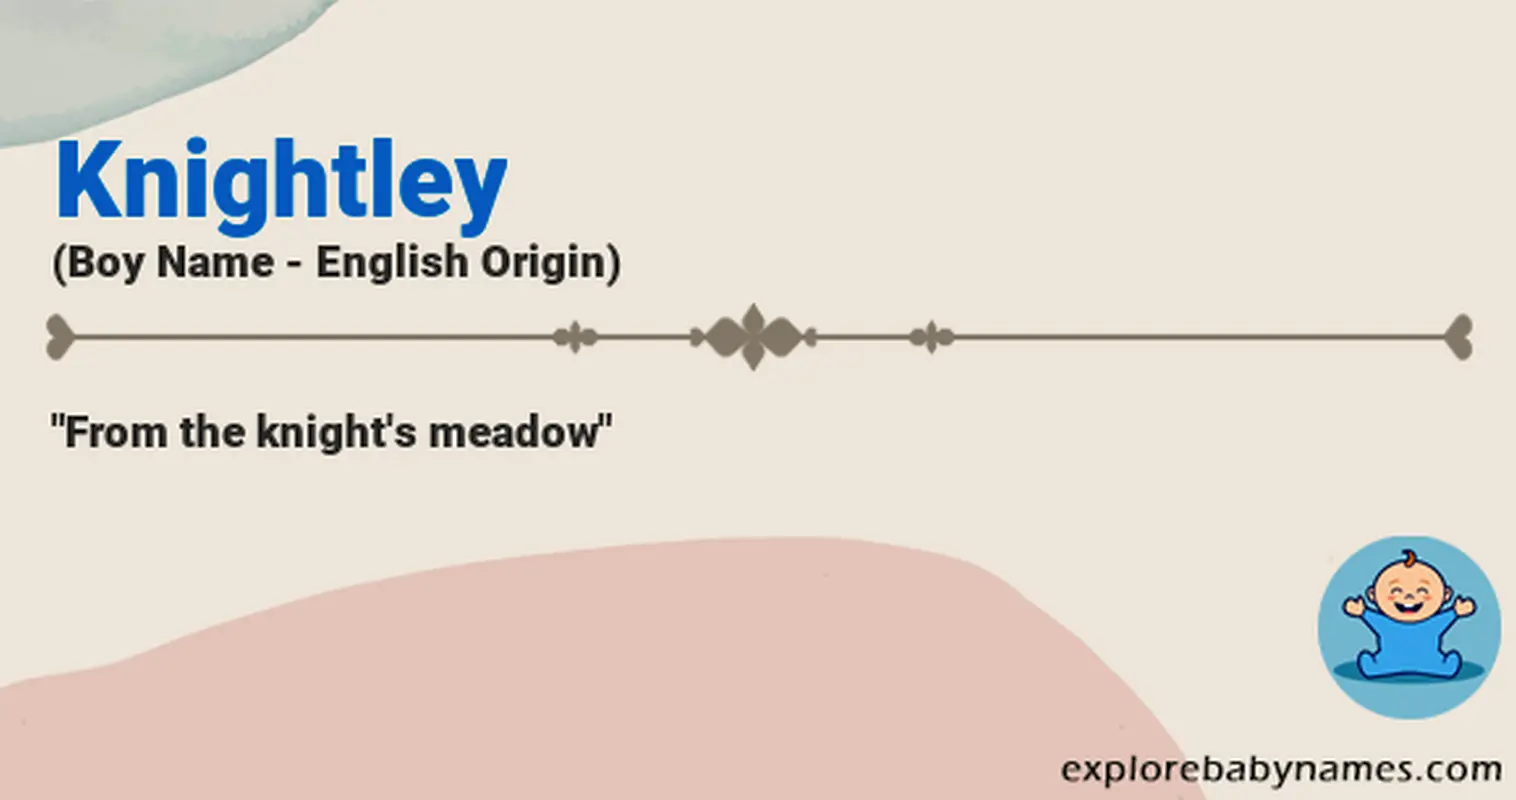 Meaning of Knightley